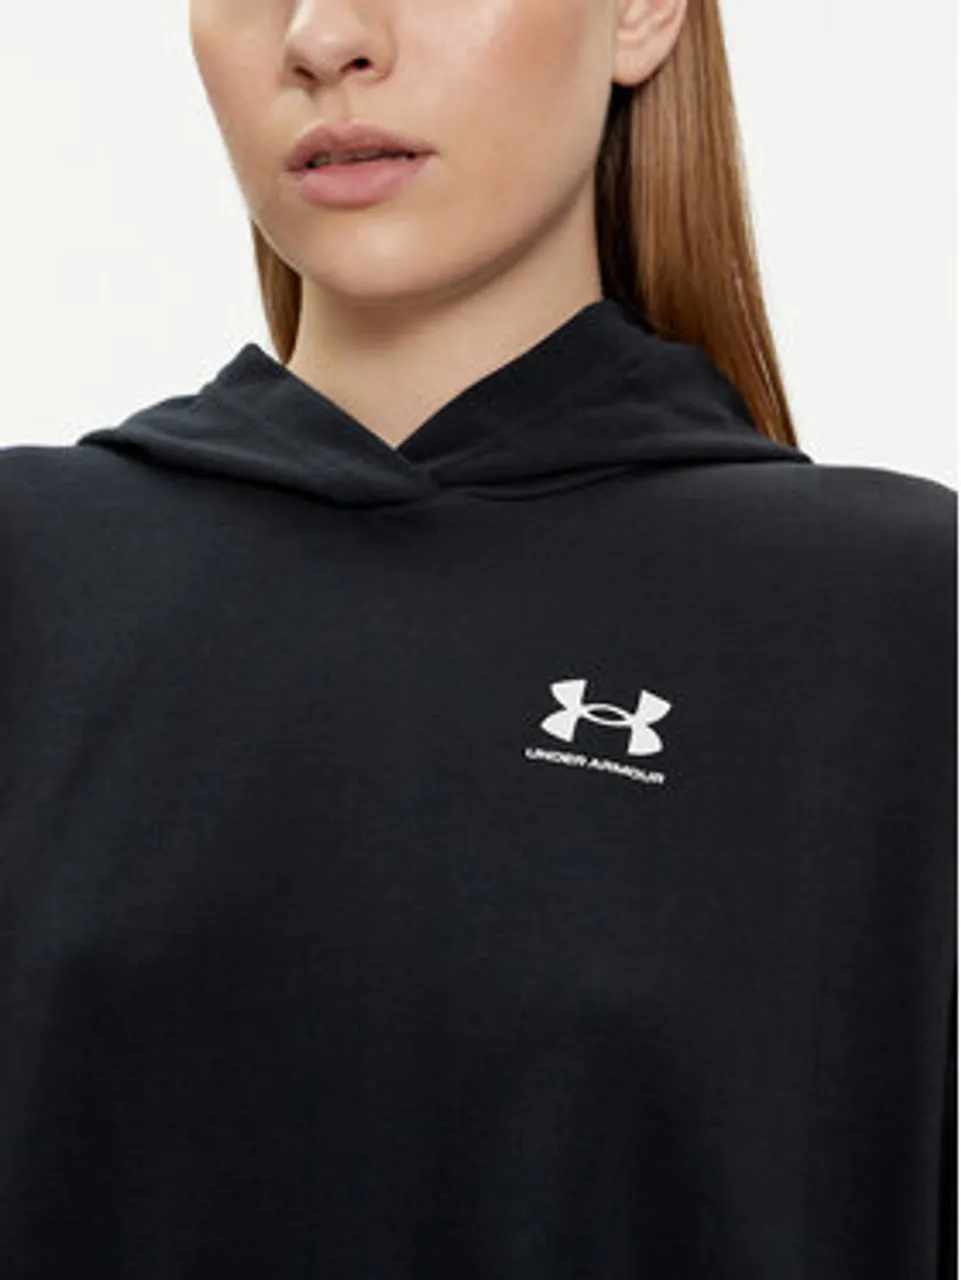 Under Armour Sweatshirt Ua Rival Terry Os Hoodie 1382736-001 Schwarz Loose Fit